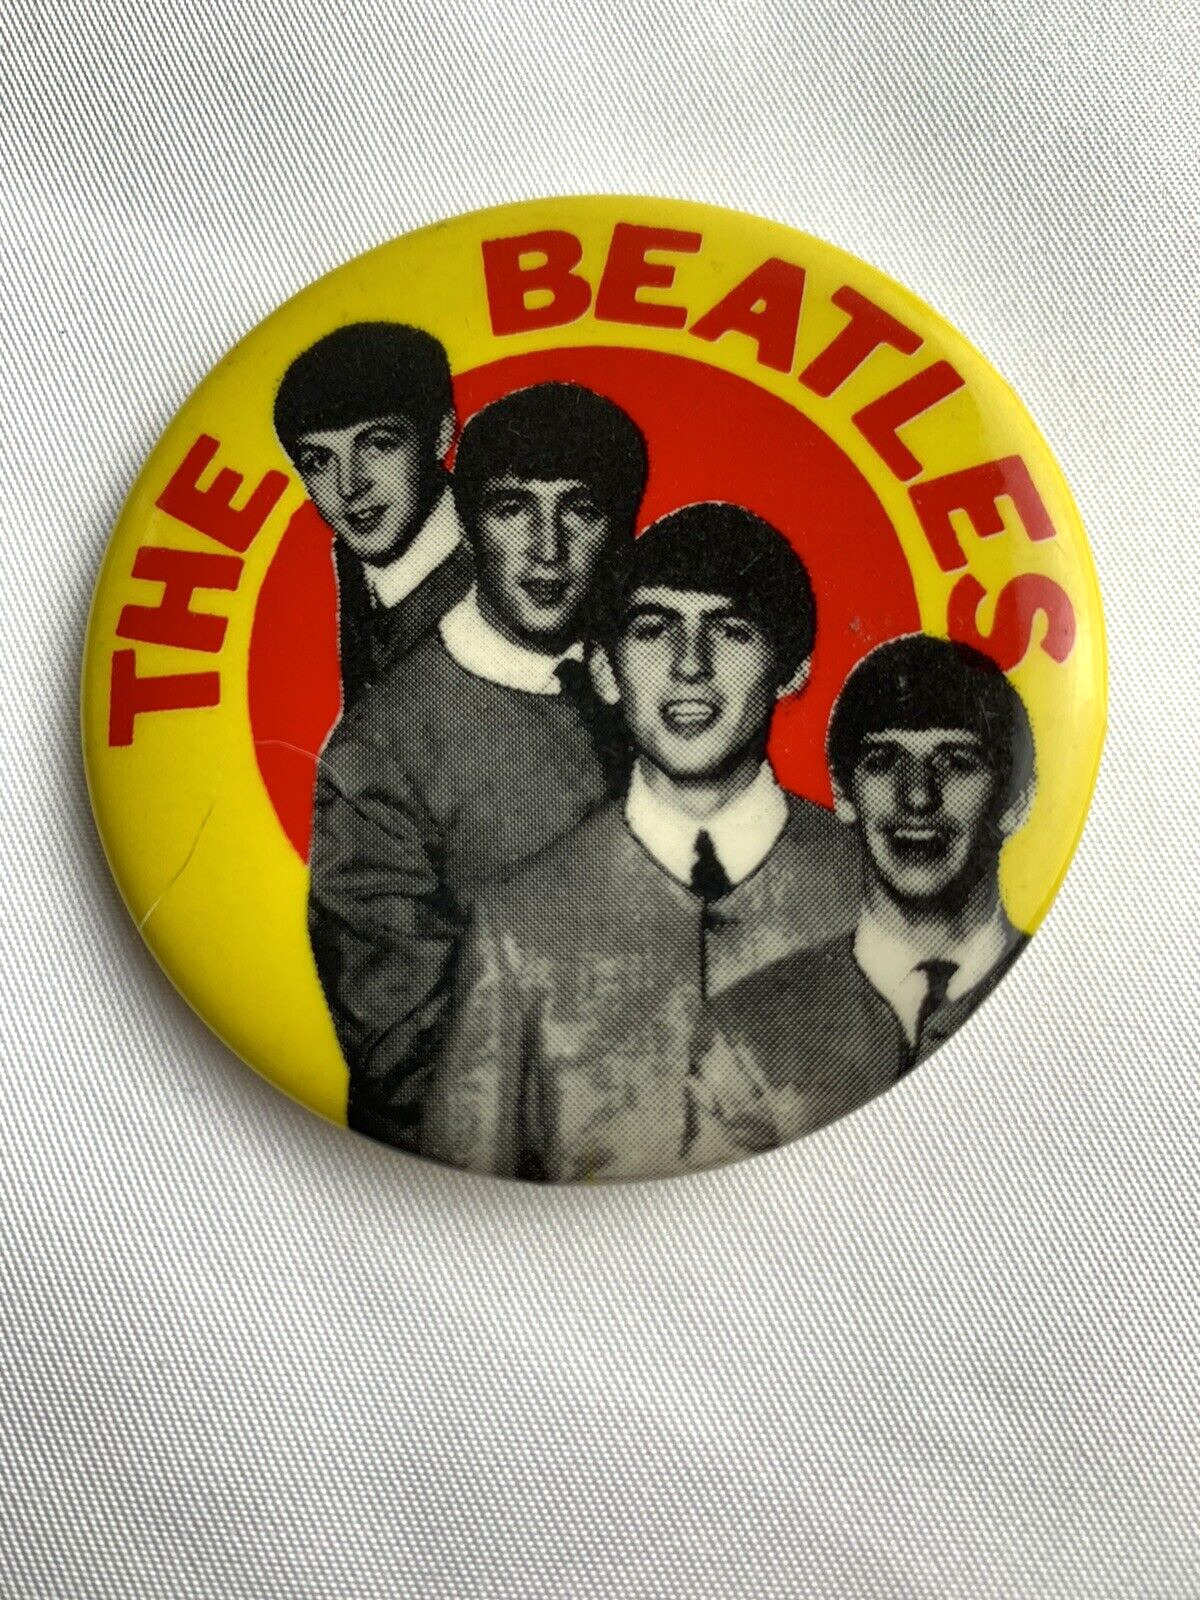 Vintage 1960s THE BEATLES pin yellow & red badge 2.25\